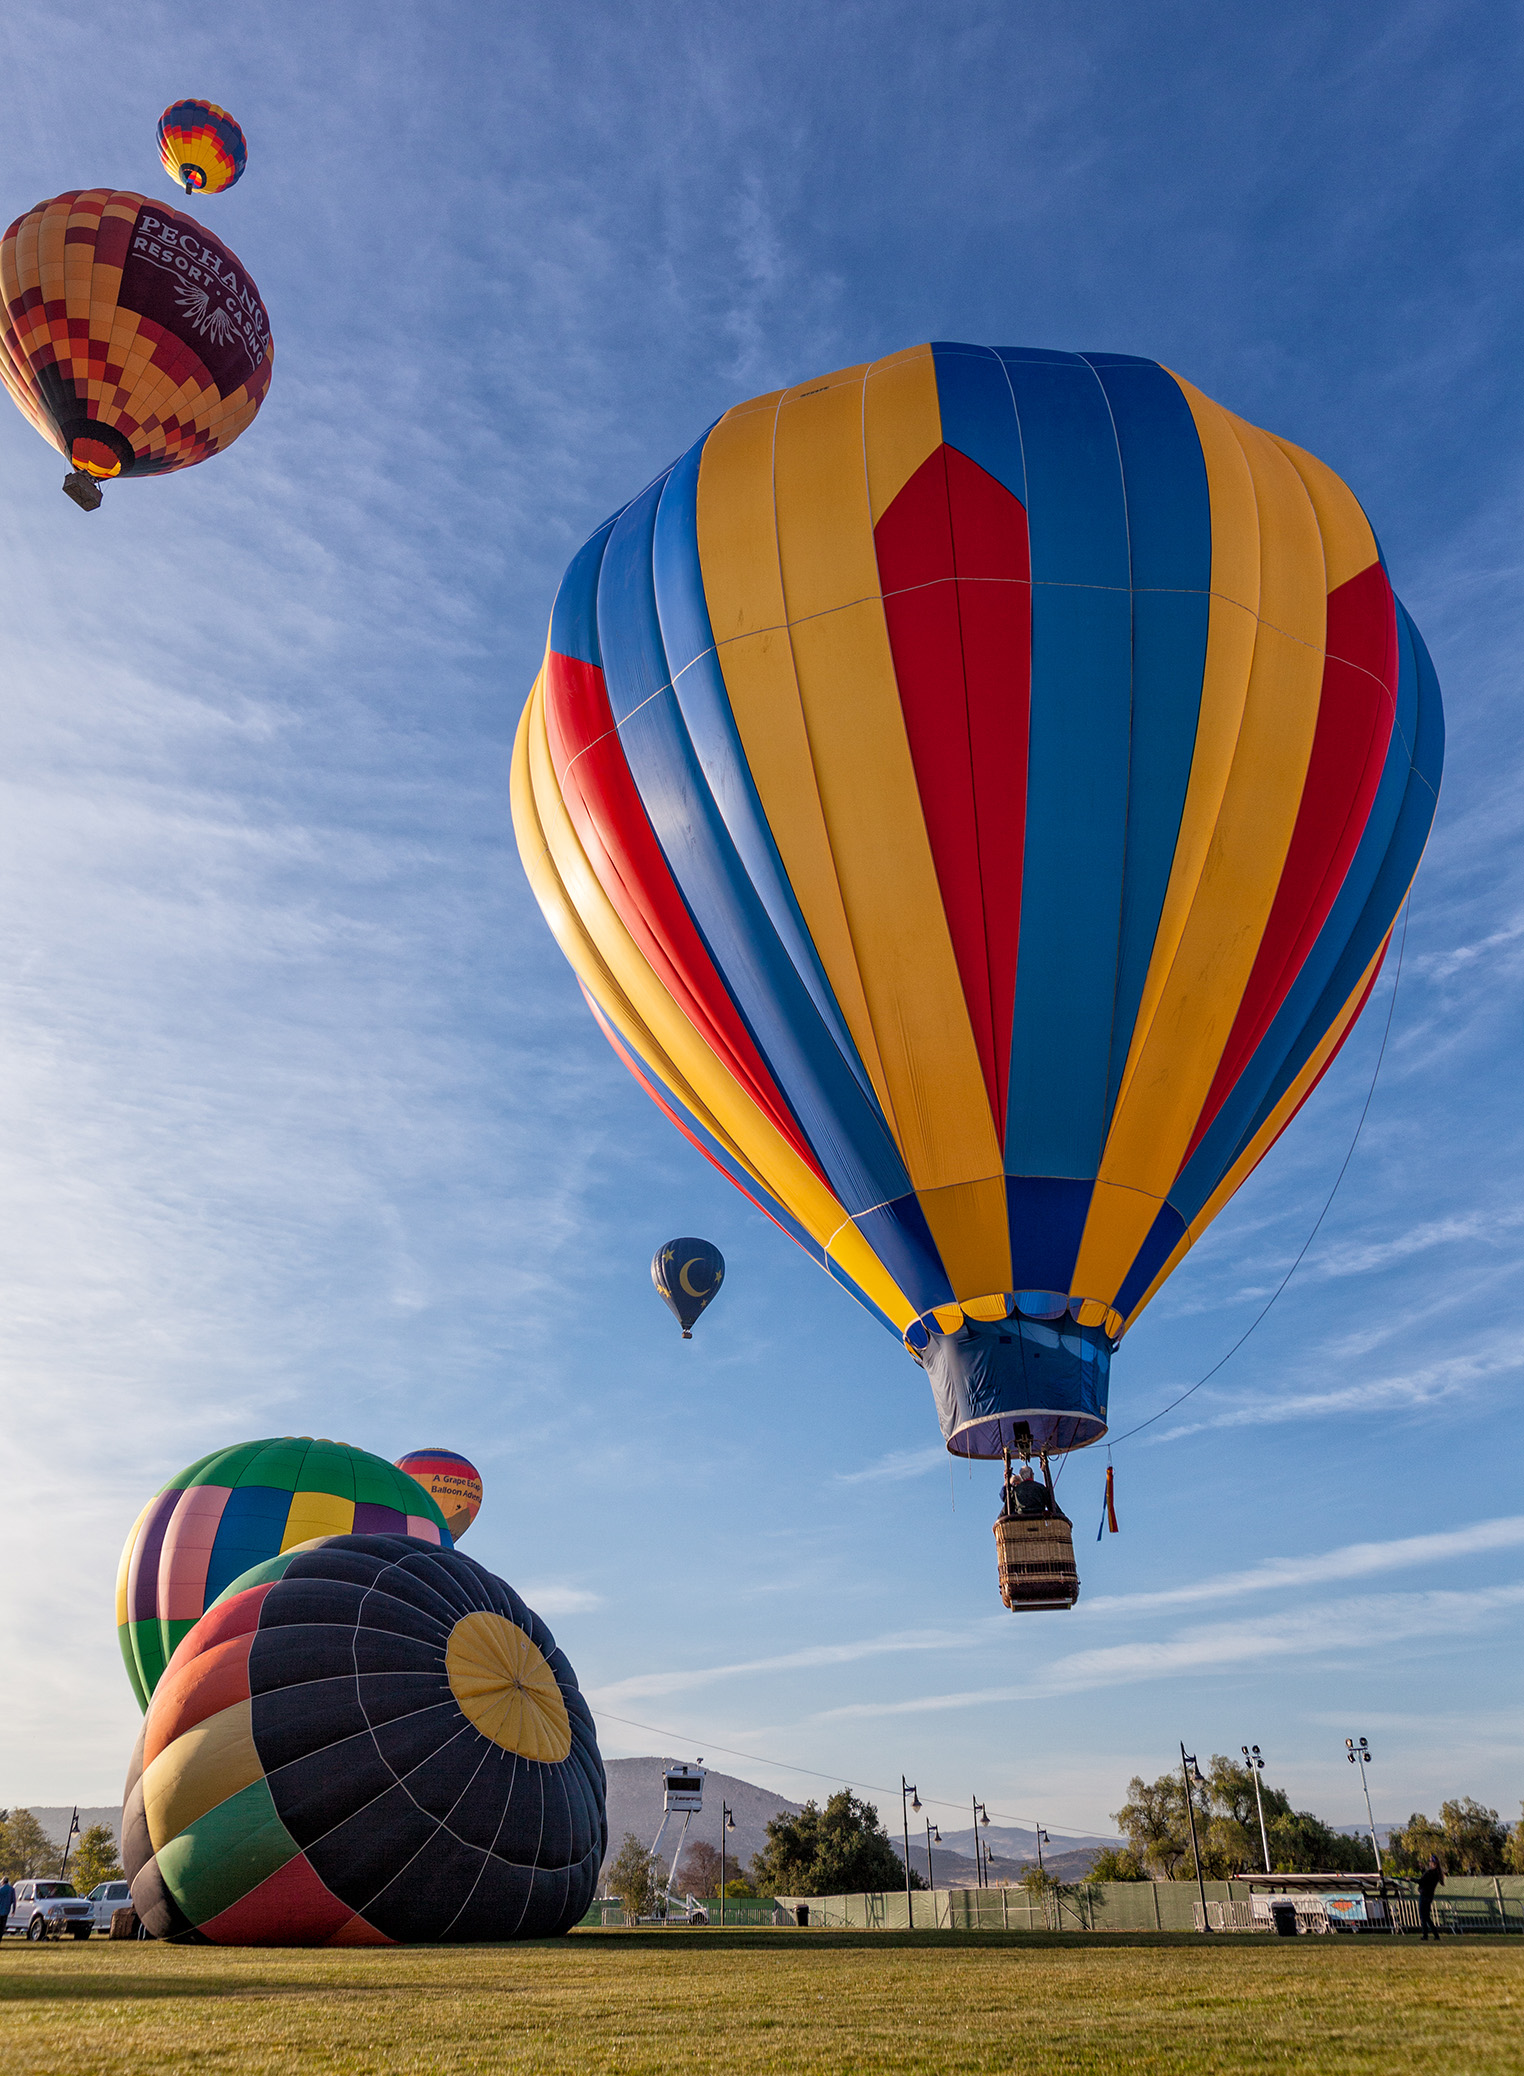 Somewhere Over the "Rainbow Gap" in Temecula you will see dozens of hot air balloons.